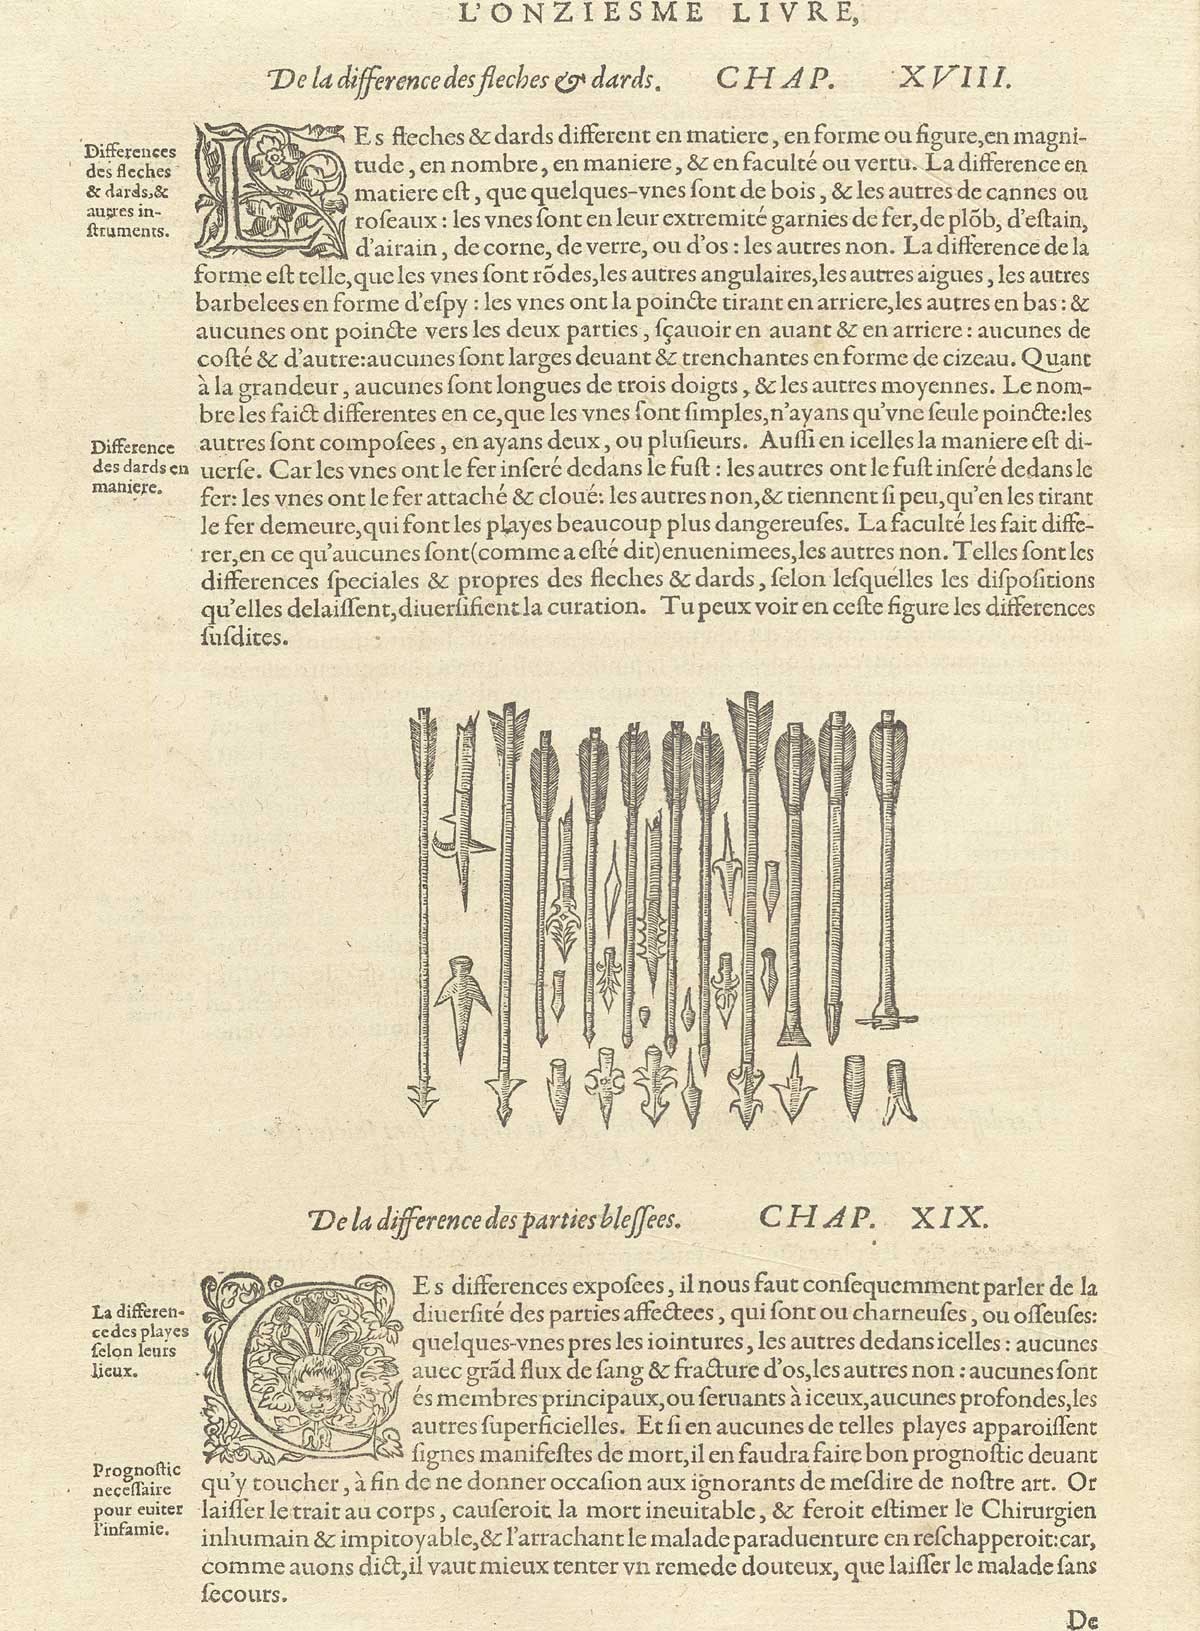 page CCCCLVI which features arrows and darts (fleches and dards) with descriptive text.